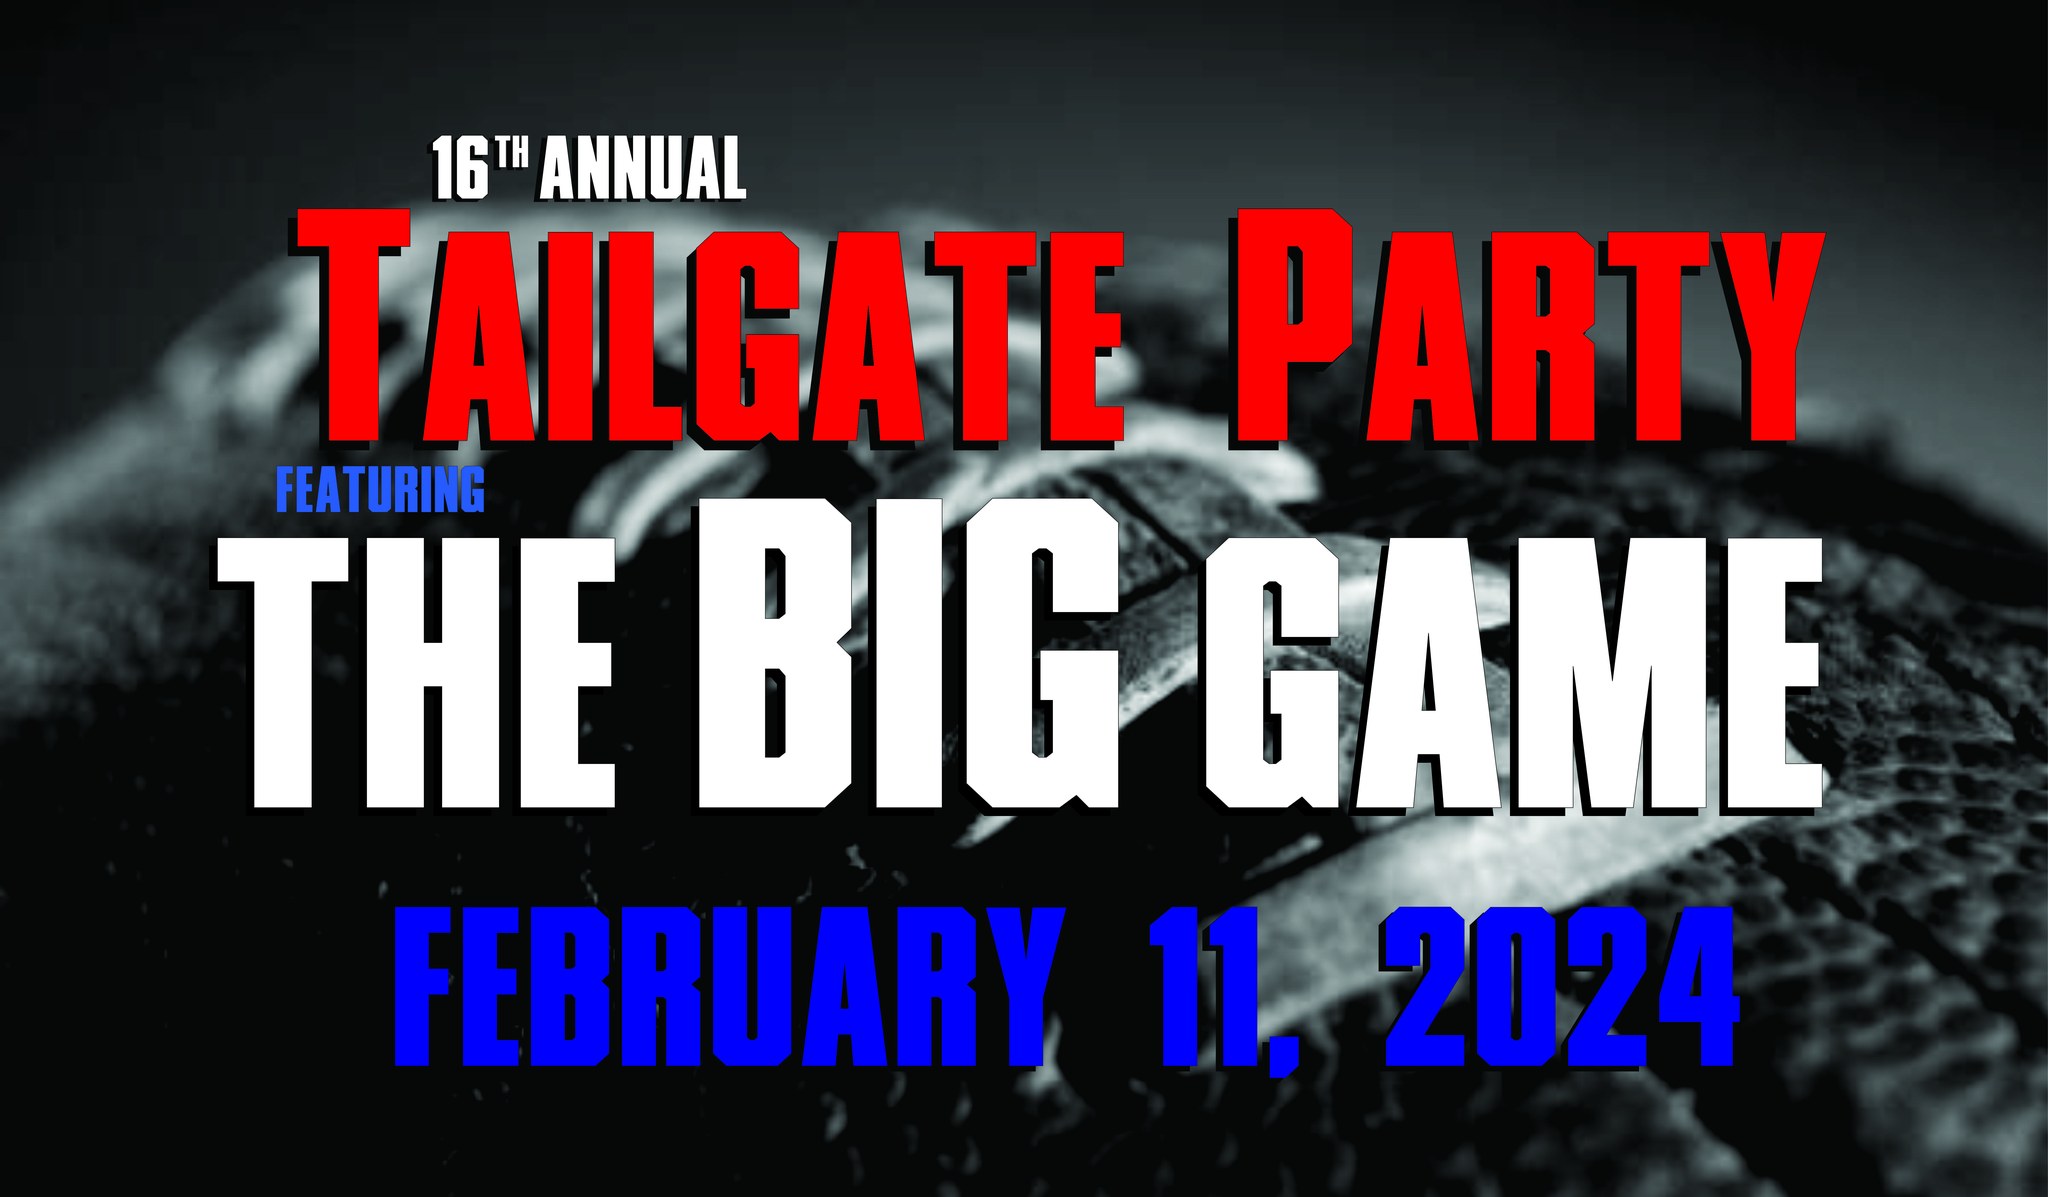 tailgate superbowl party silent auction red deer alberta canada february 2024 home of hope home church tailgate